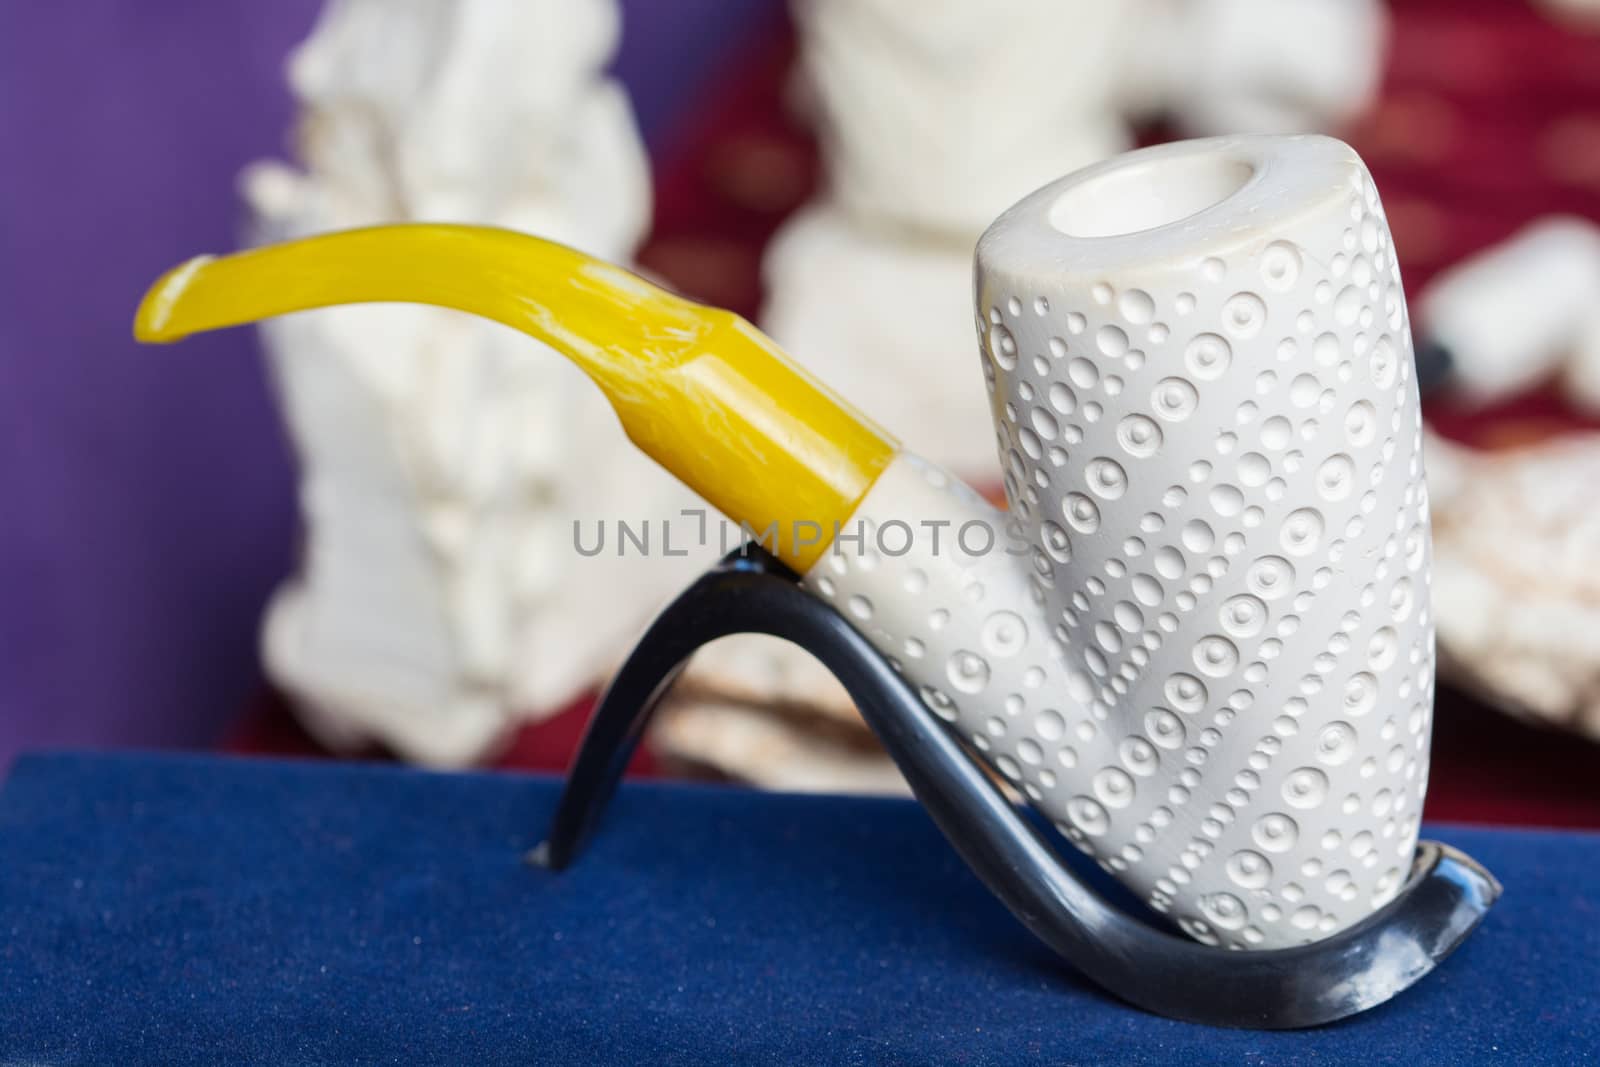 meerschaum tobacco pipe in the form of sculptures. Almost all of meerschaum is removed from Eskisehir / Turkey.